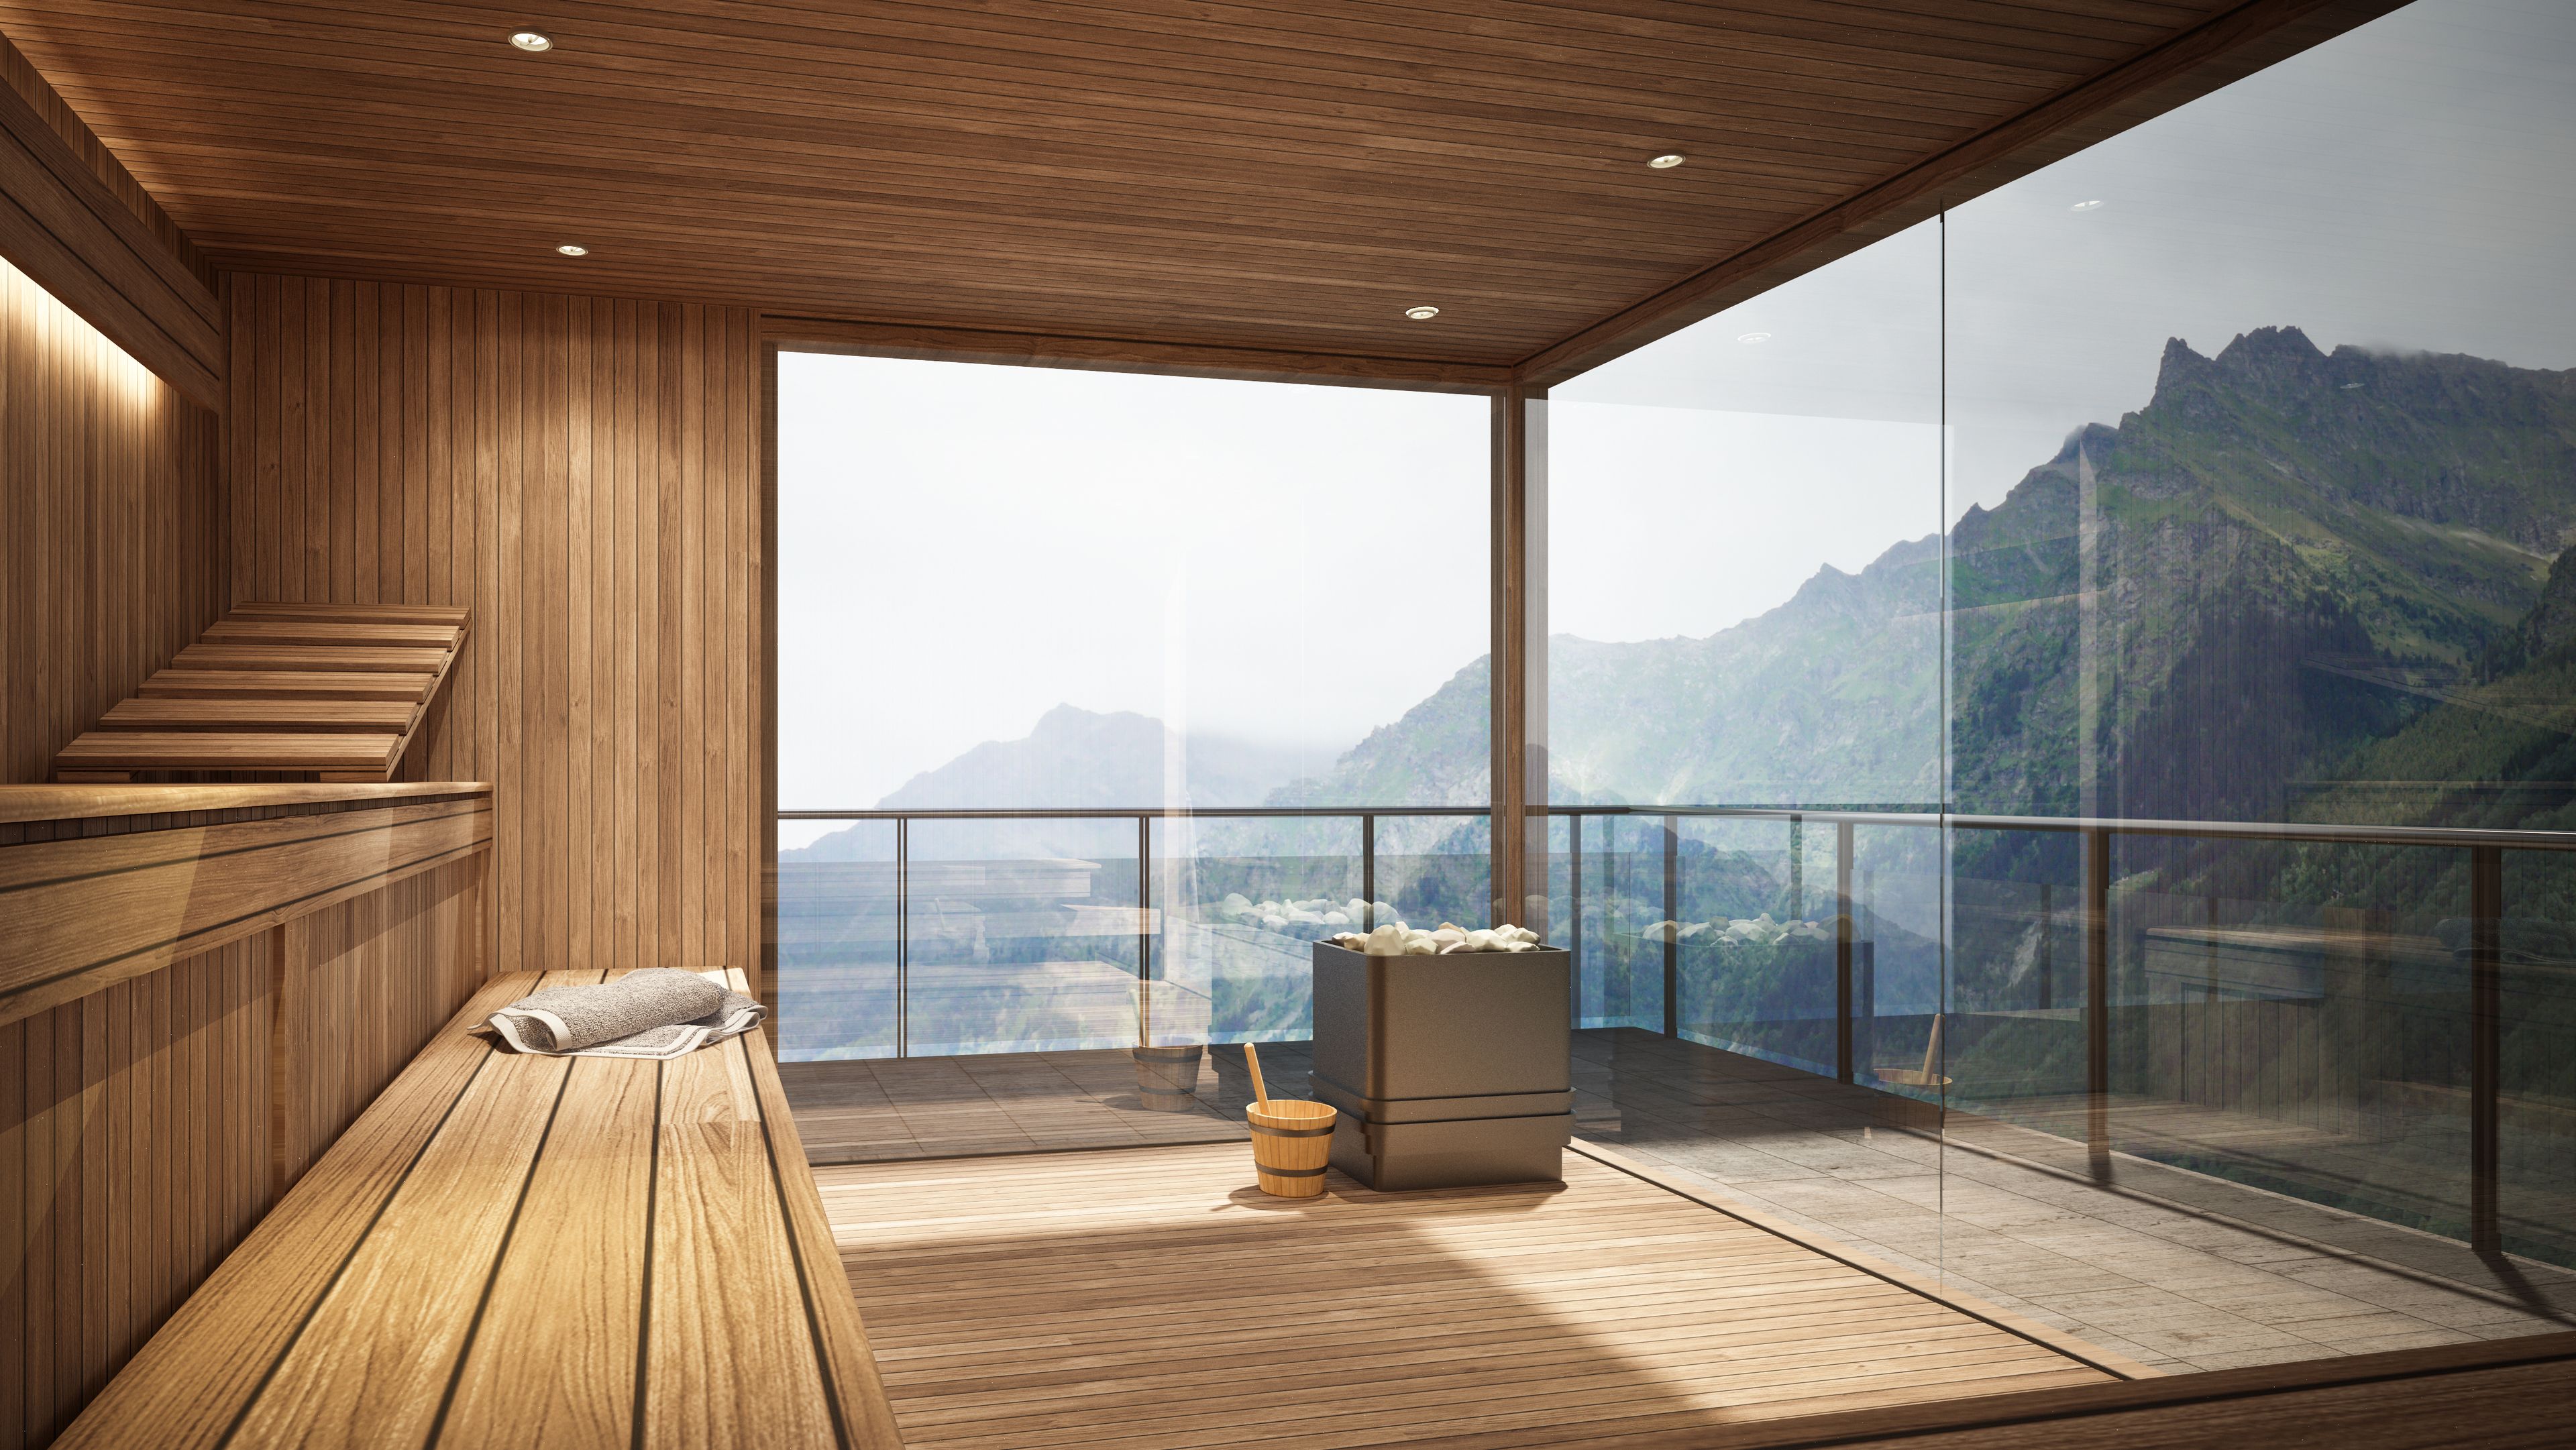 Sauna with a view of the mountains